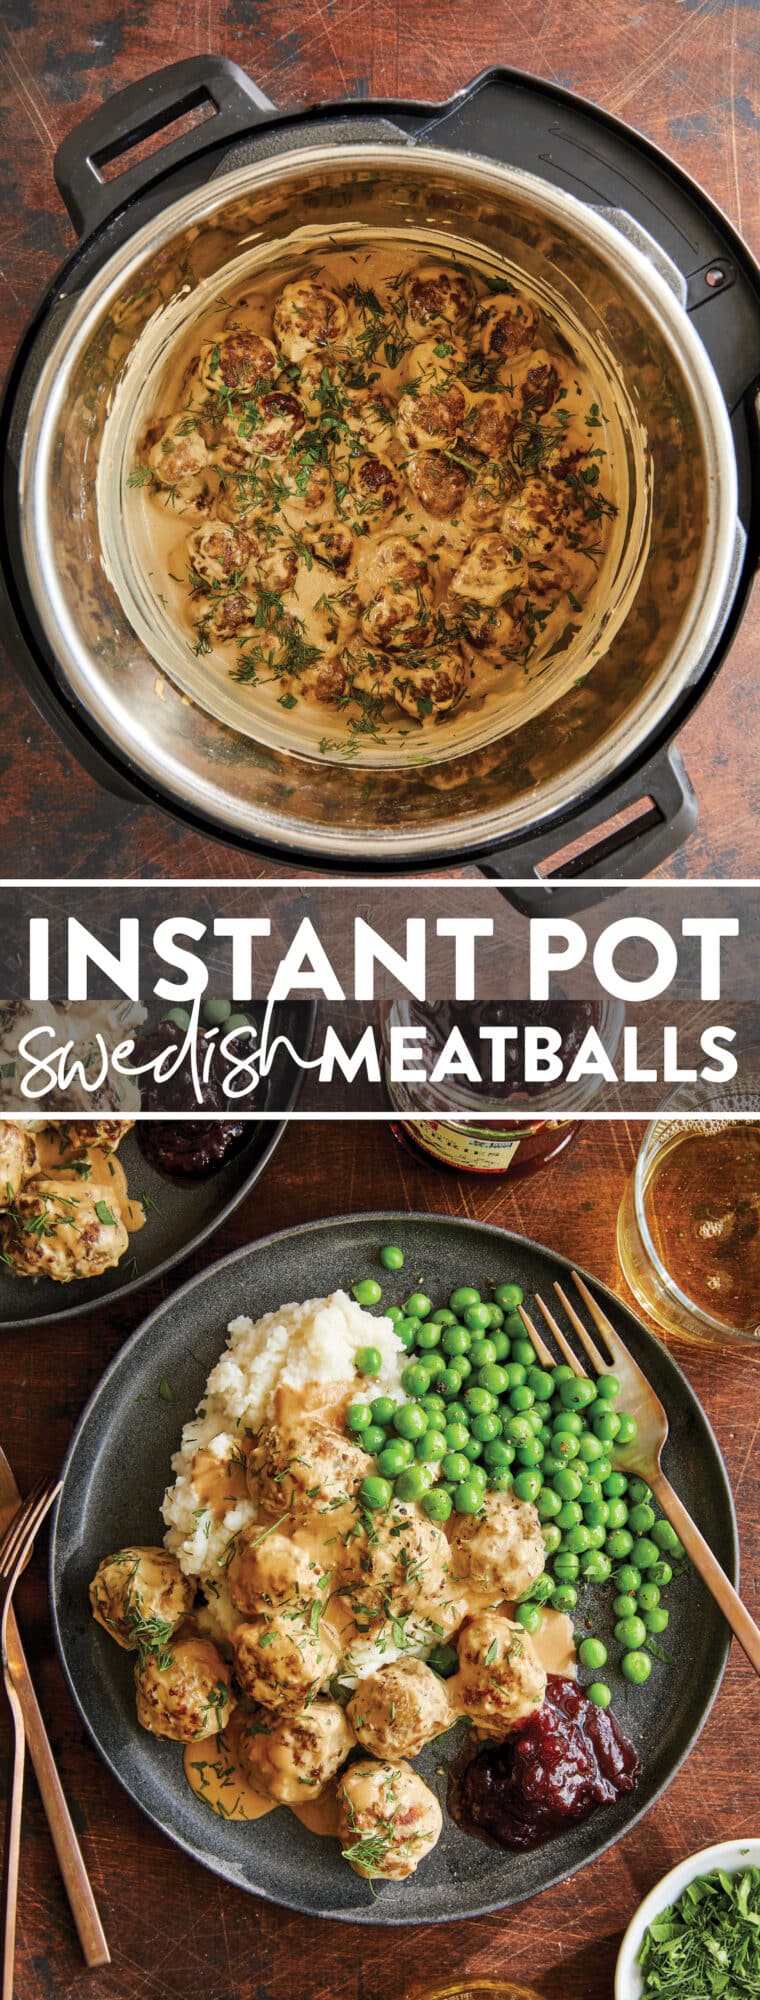 Instant Pot Swedish Meatballs - Everyone's favorite IKEA Swedish meatballs made so easily right in your pressure cooker! So tender so creamy!